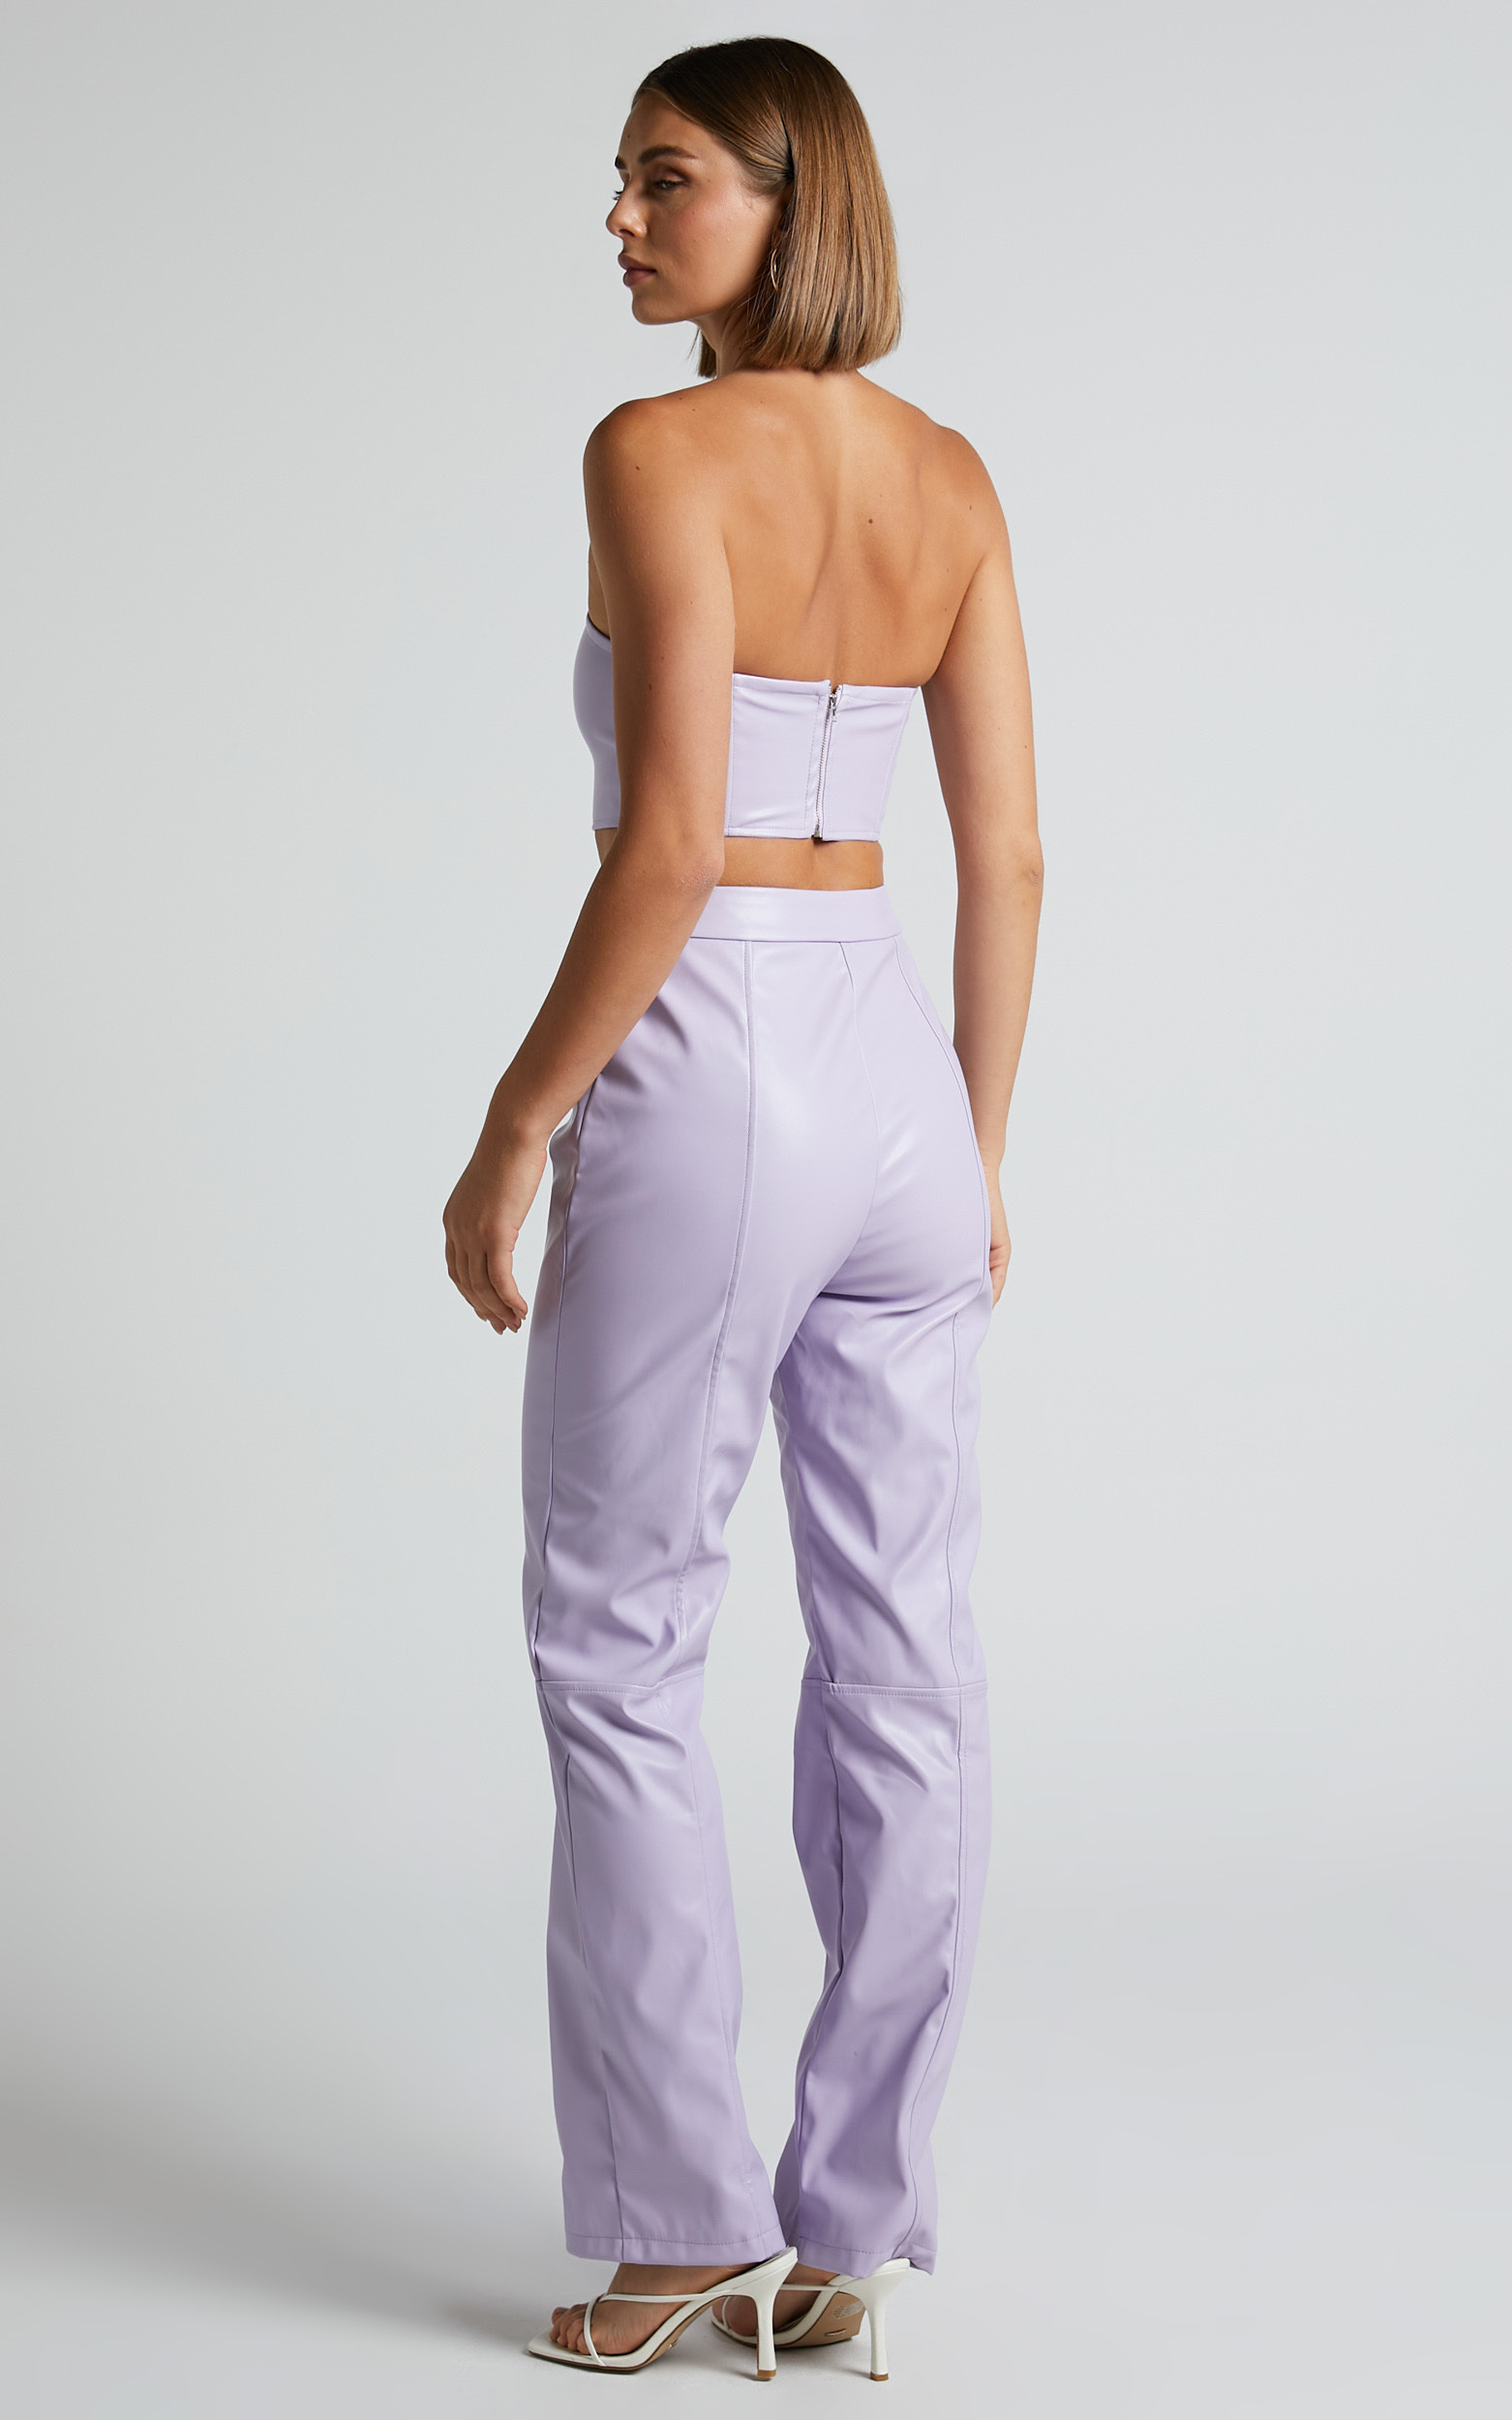 4th & Reckless Tropez Leather Trouser in Lilac | Showpo USA